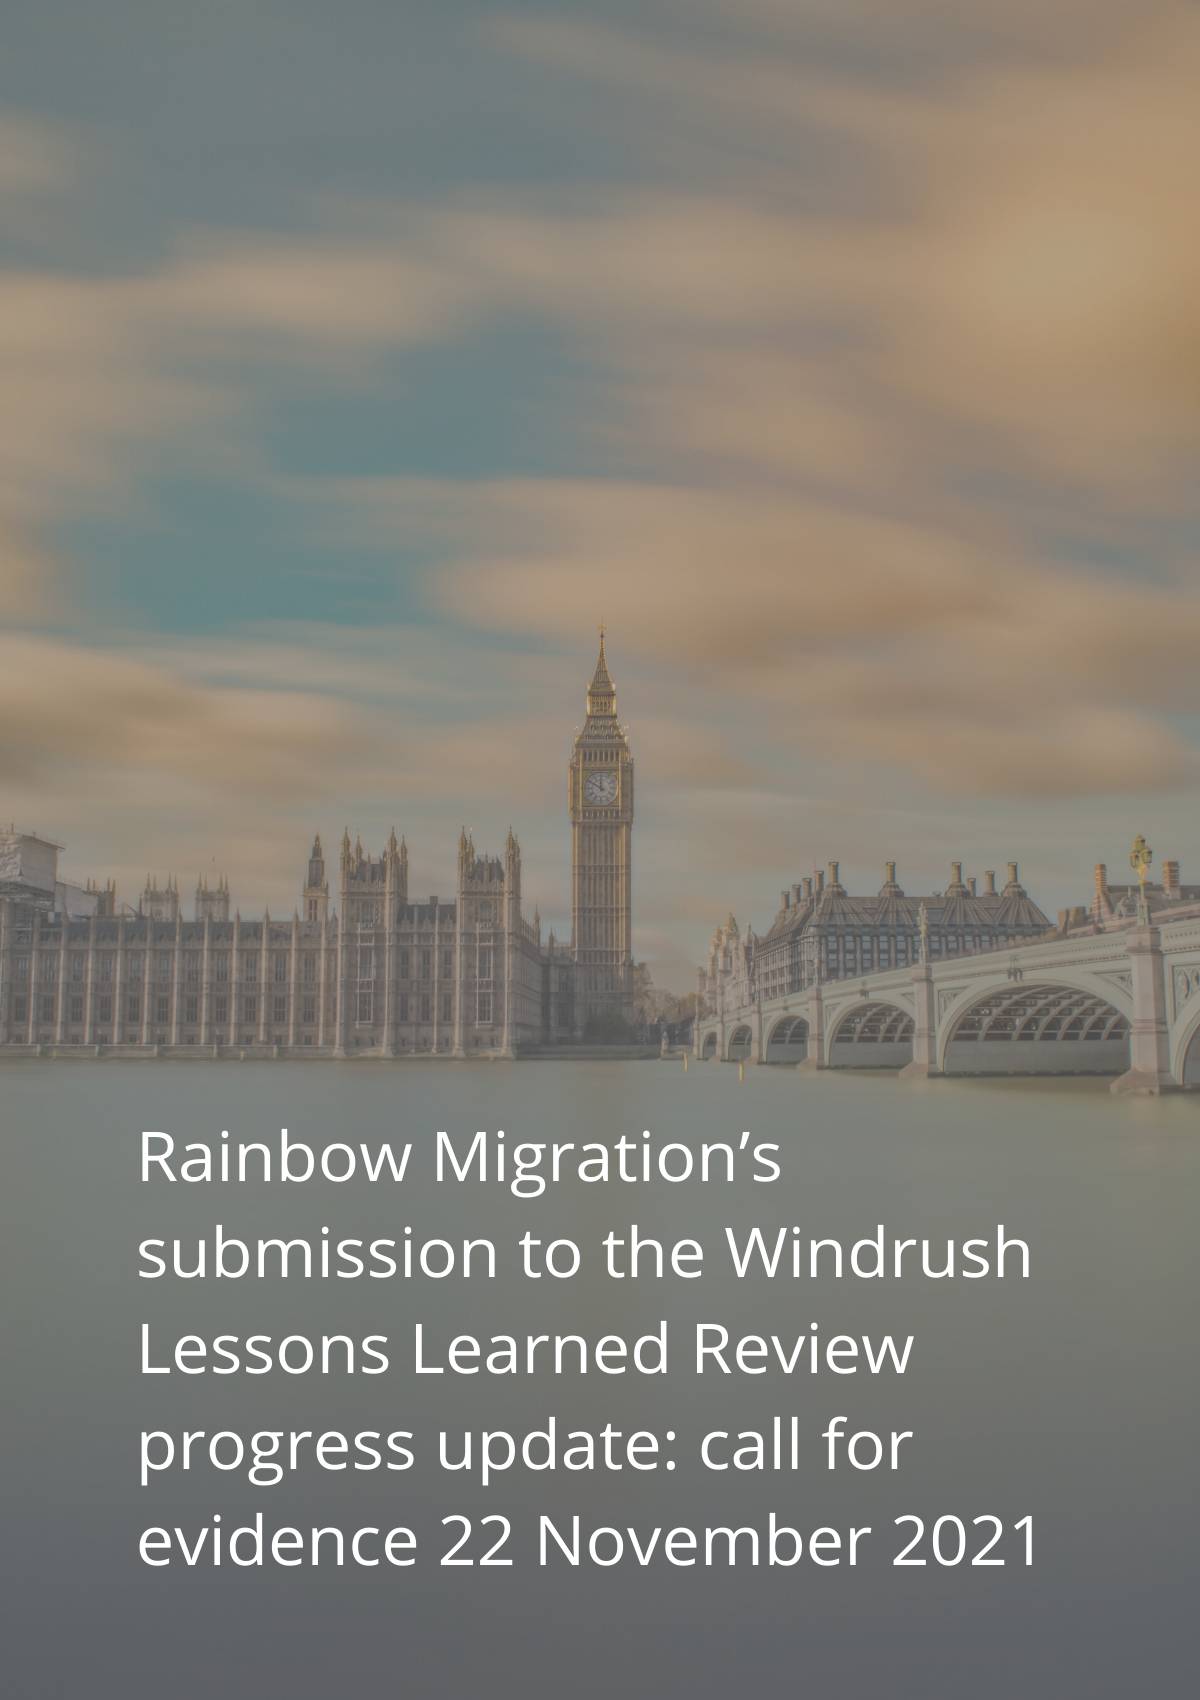 Rainbow migration's submission to the windrush lessons learned review.